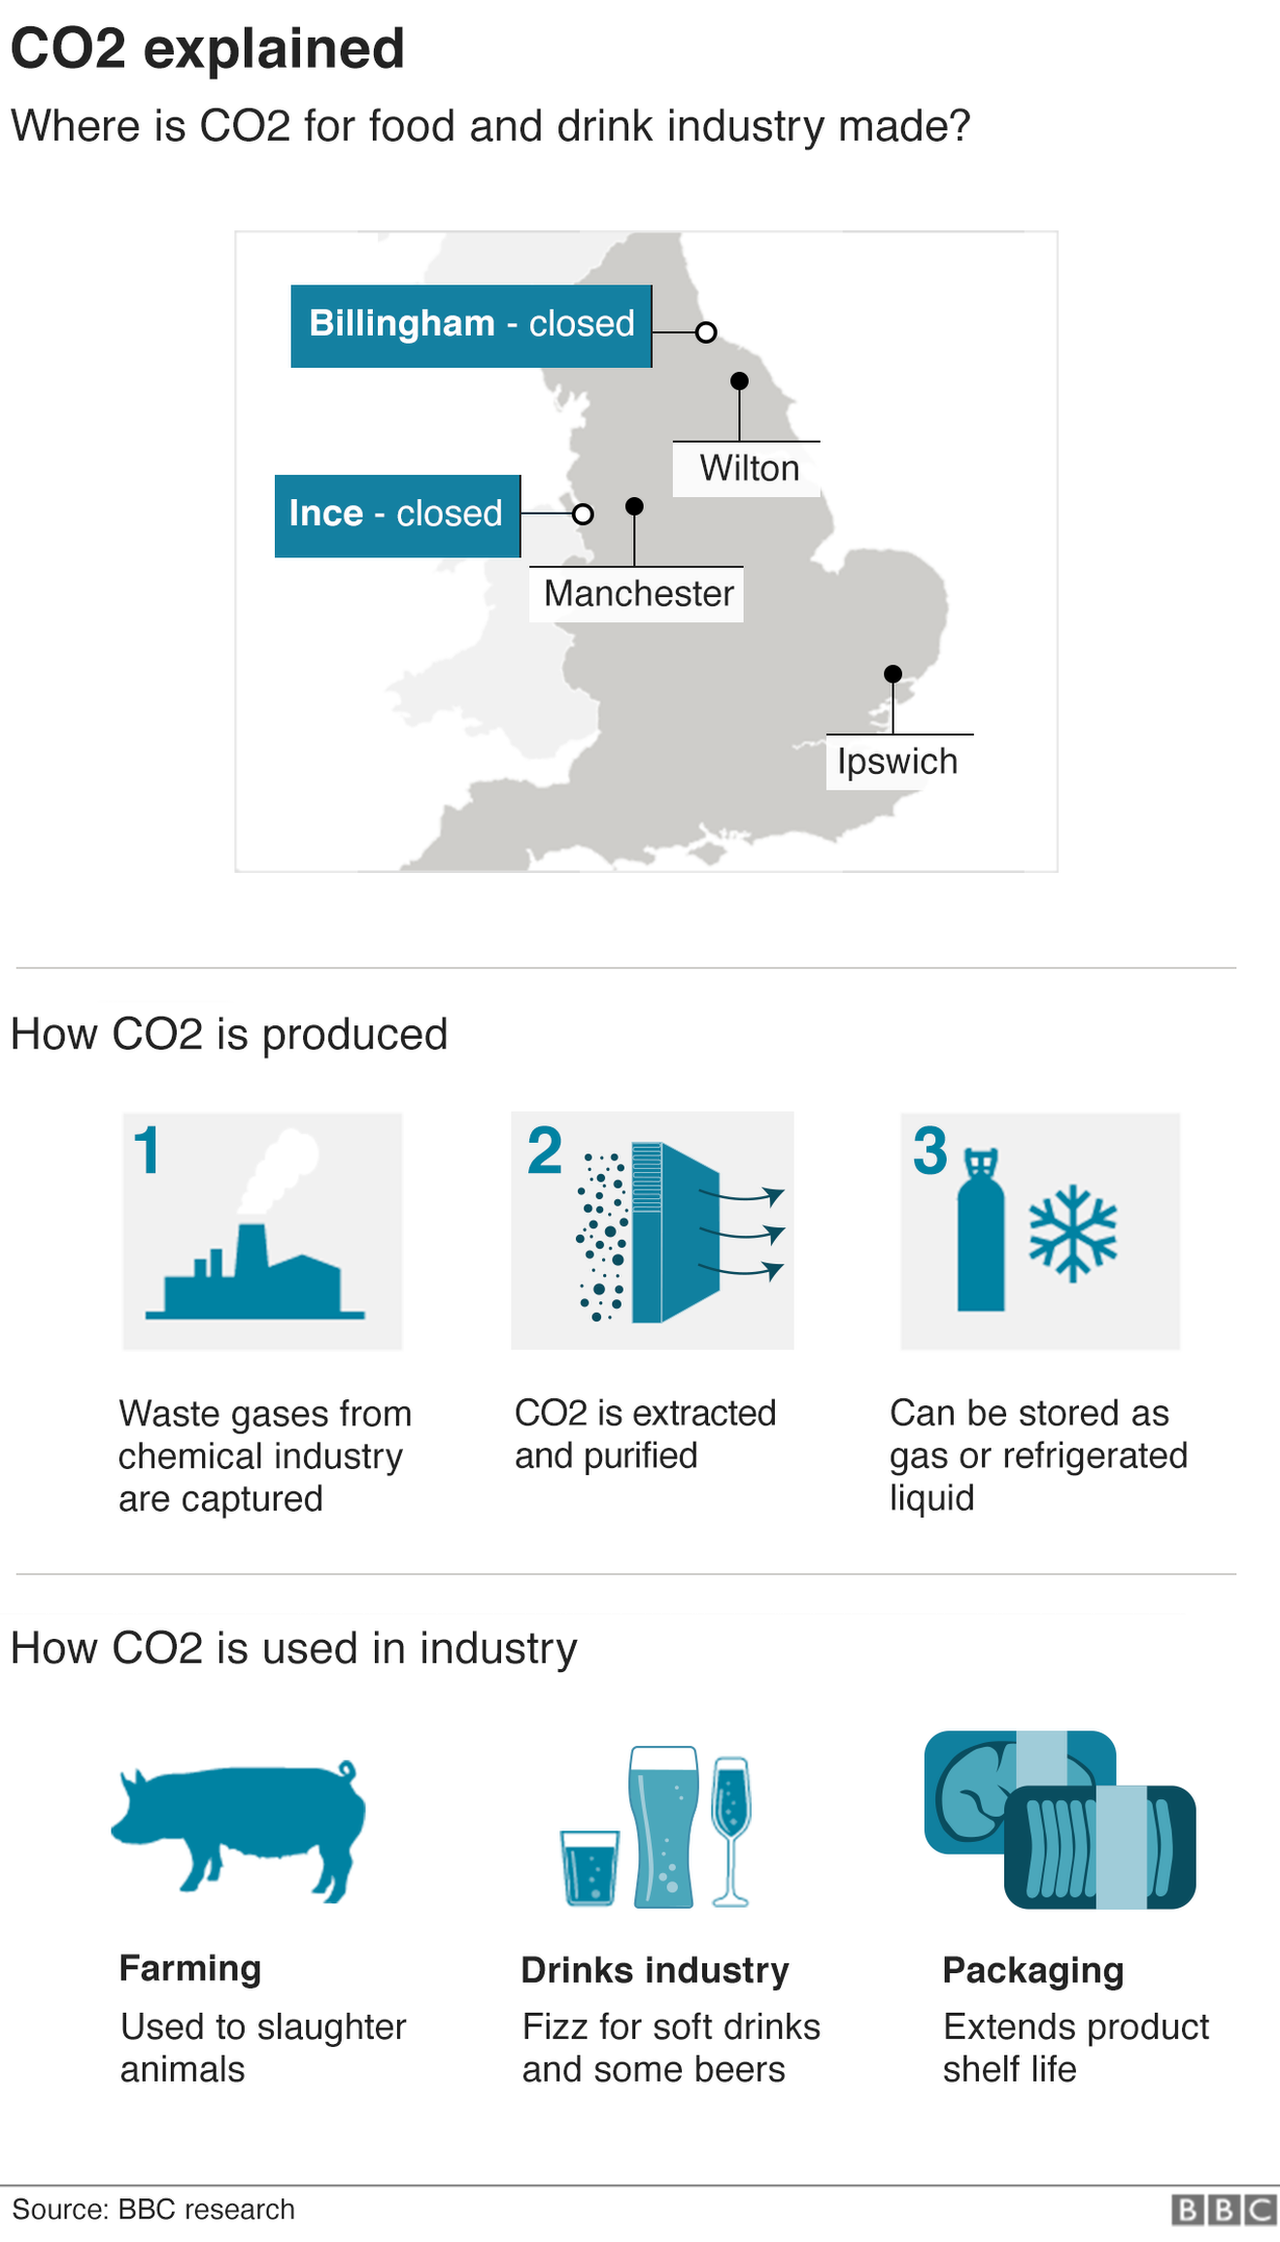 Graphic showing where CO2 is produced in the UK and how it is used in the food industry.